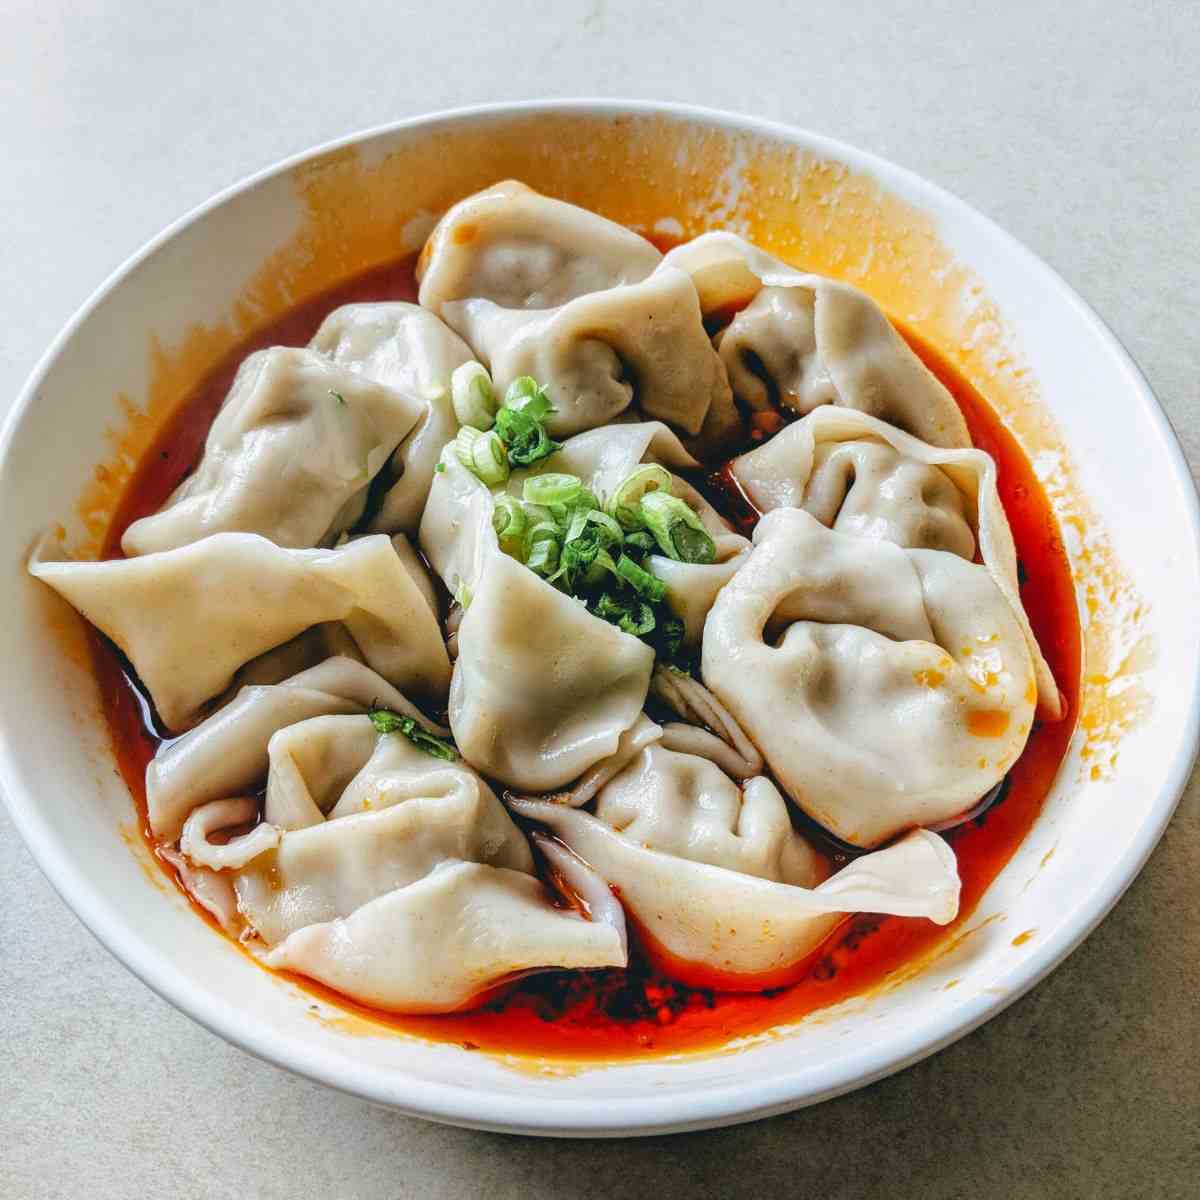 Chinese wonton dumplings in a bowl with red sauce and green onion on the top.